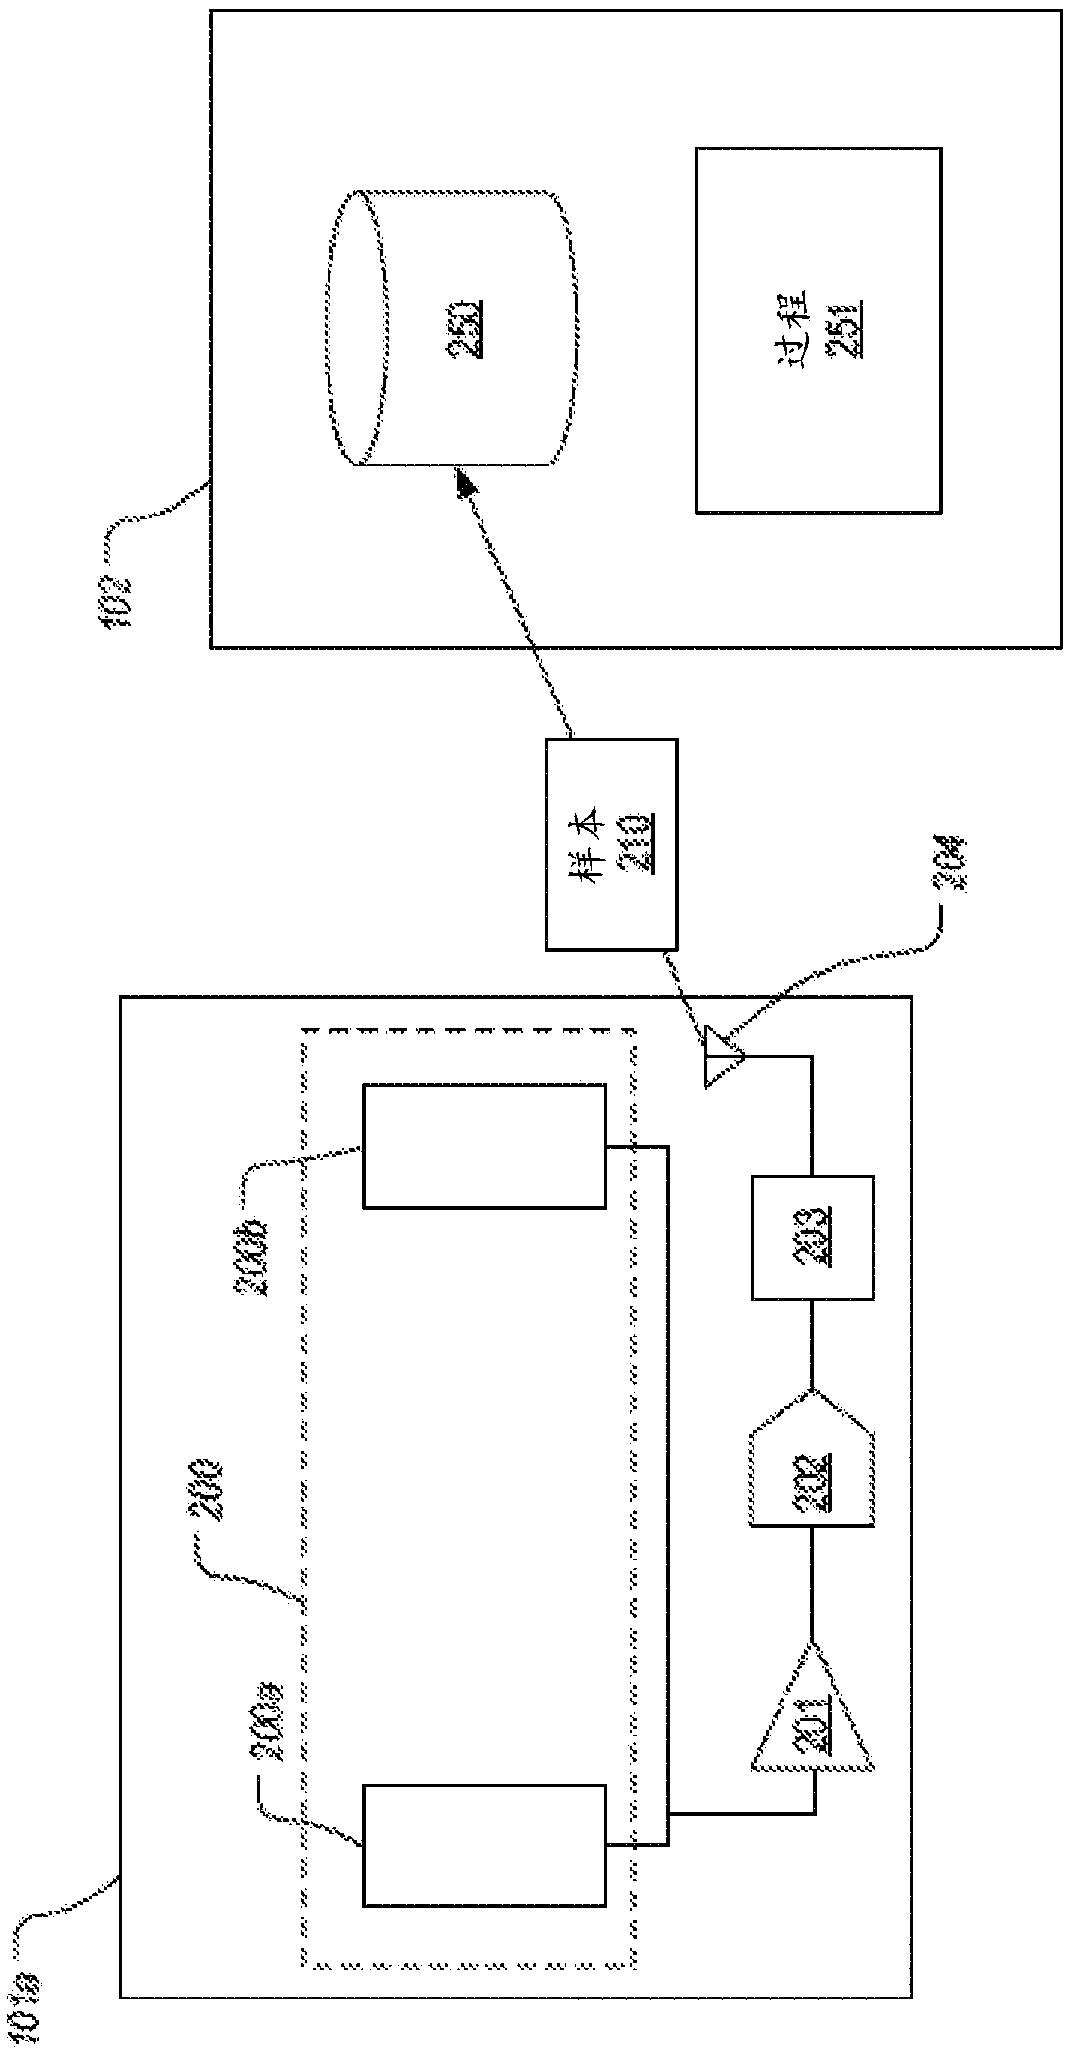 Device and system for monitoring and treating muscle tension-related medical conditions